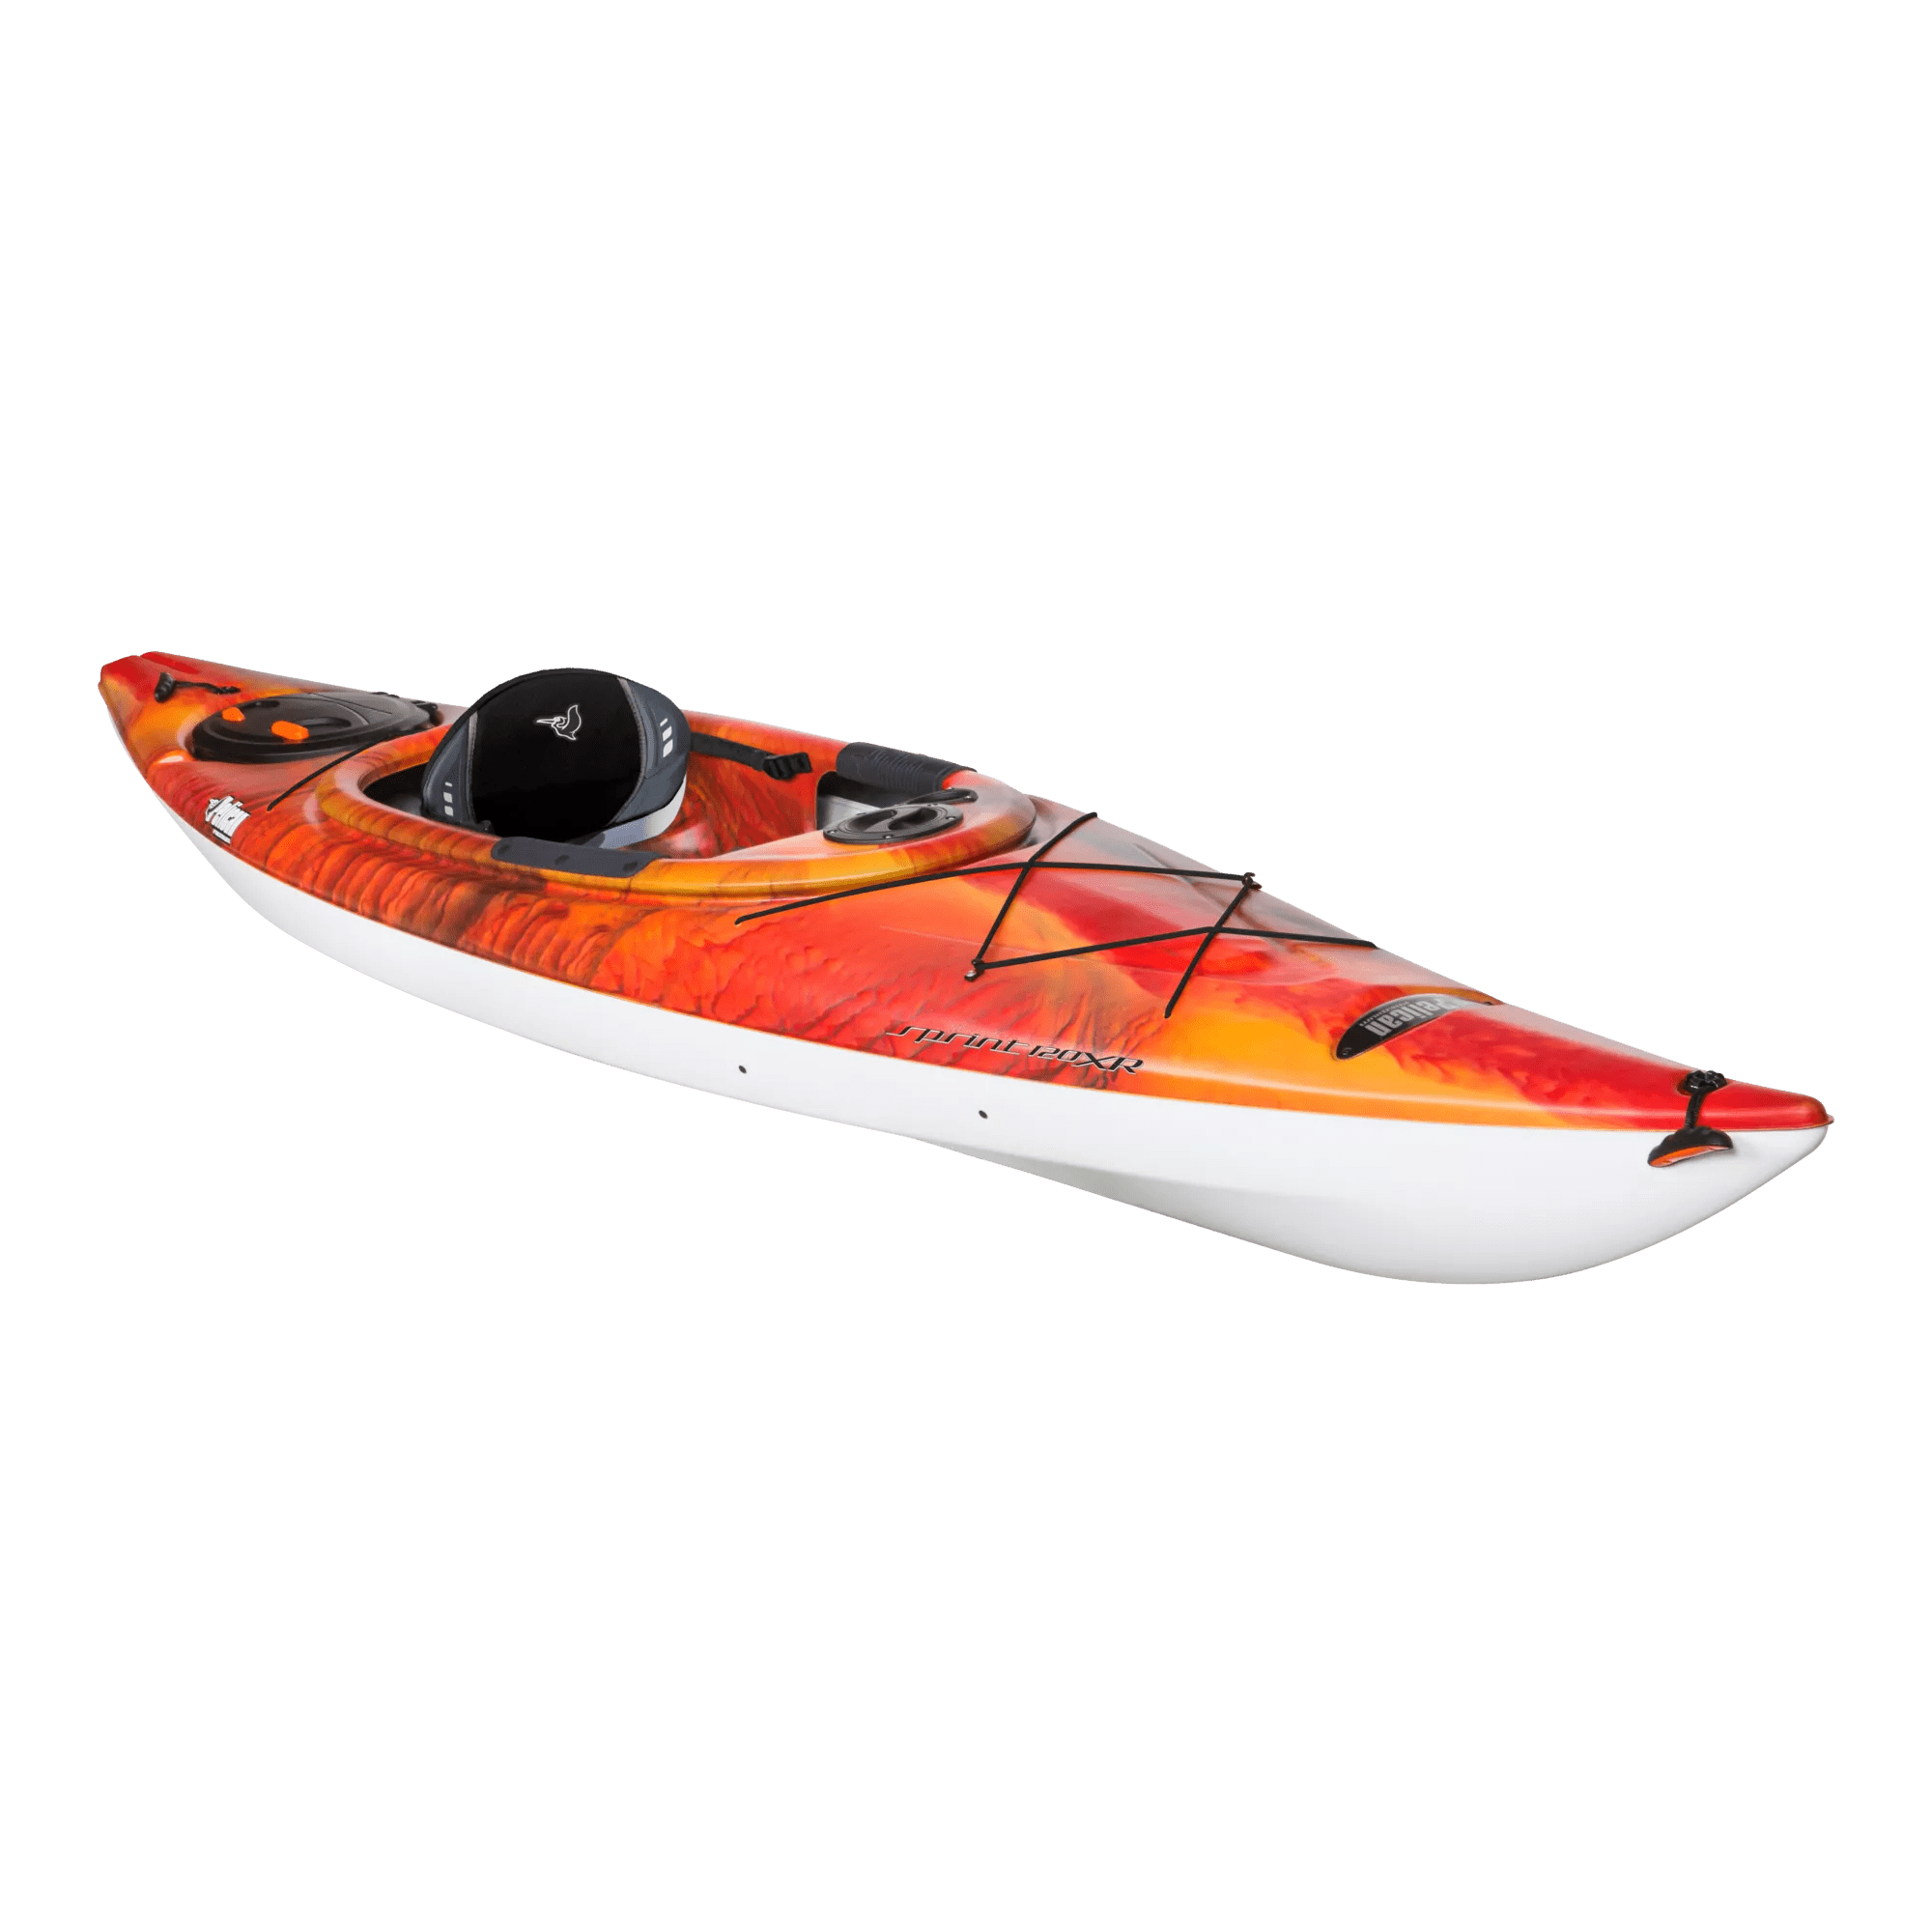 PELICAN - Sprint 120XR Performance Kayak - Discontinued color/model - Red - KNP12P100-00 - ISO 